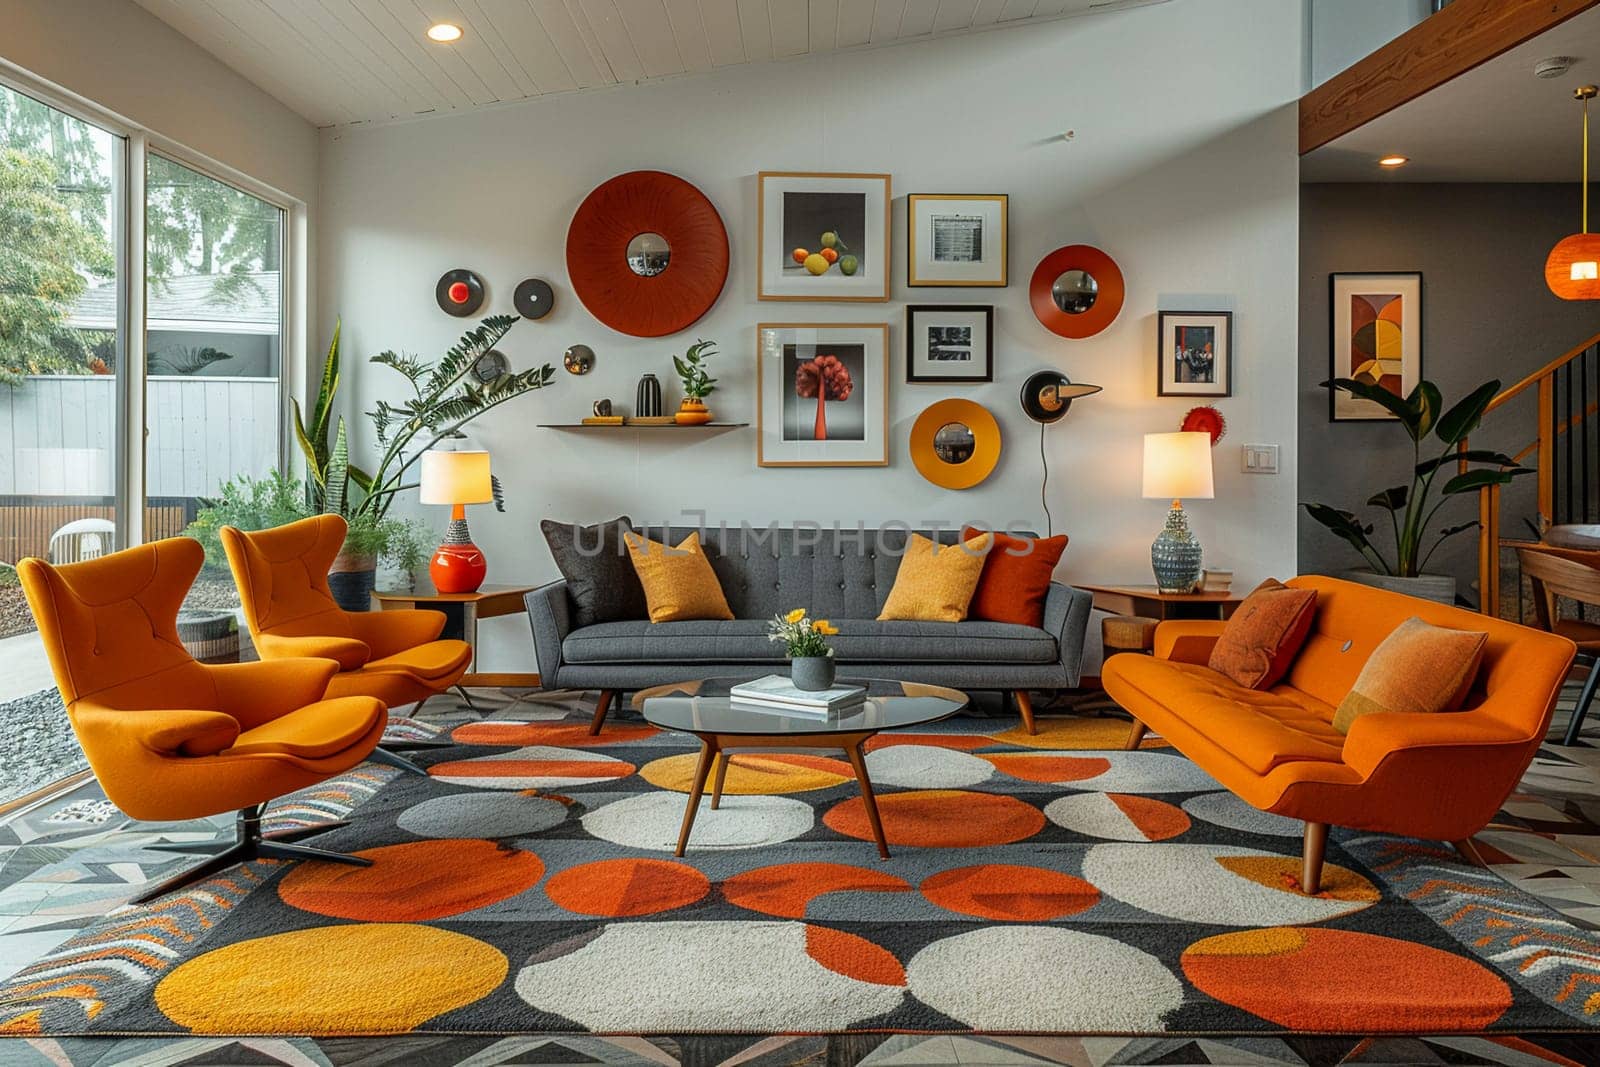 Mid-century modern living room with iconic furniture and geometric patterns